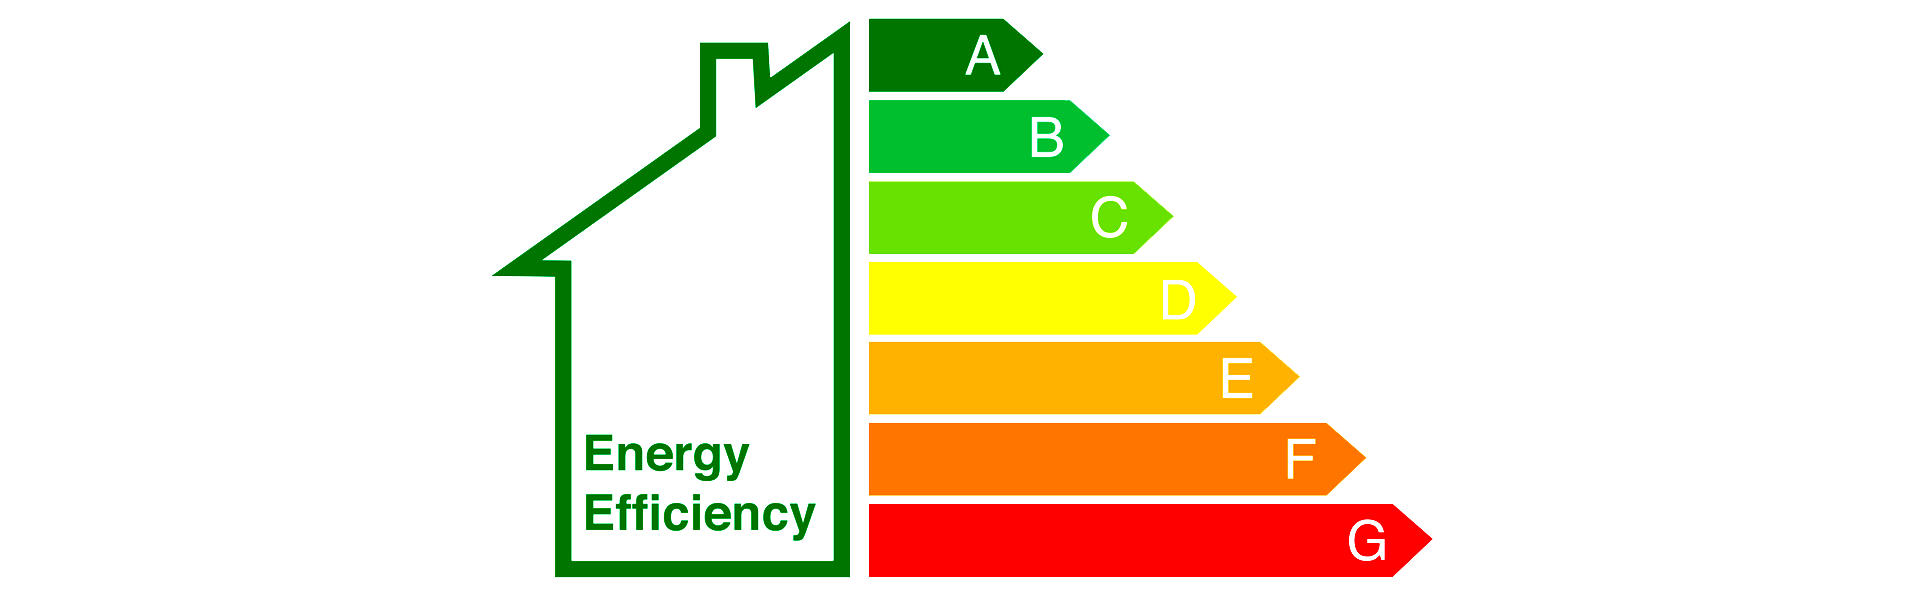 have-you-checked-your-property-s-epc-energy-performance-certificate